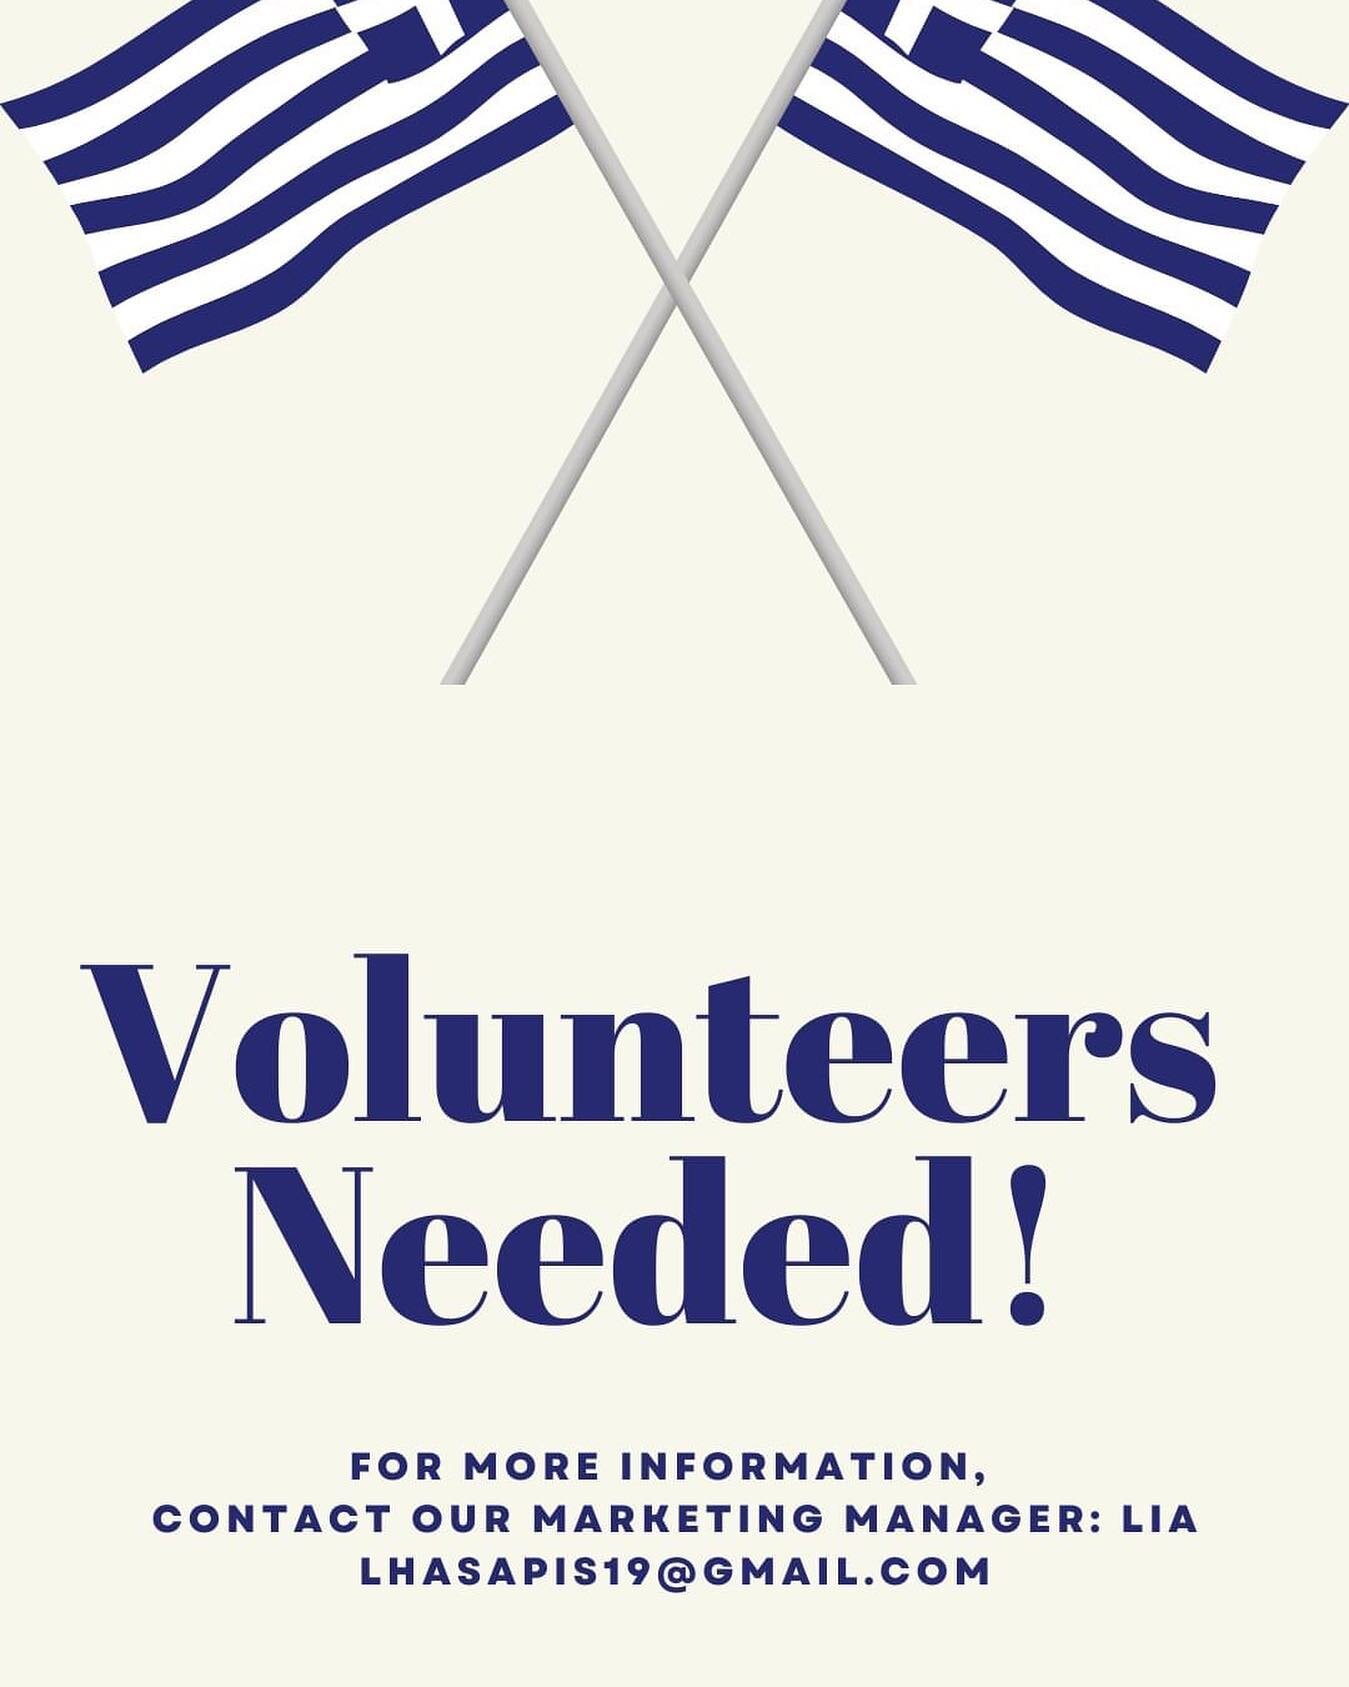 Looking to fulfill your Volunteer Hours, look no further. We need volunteers for our Annual Greek Festival in September.
For more information, please contact Lia Hasapis at lhasapis19@gmail.com.